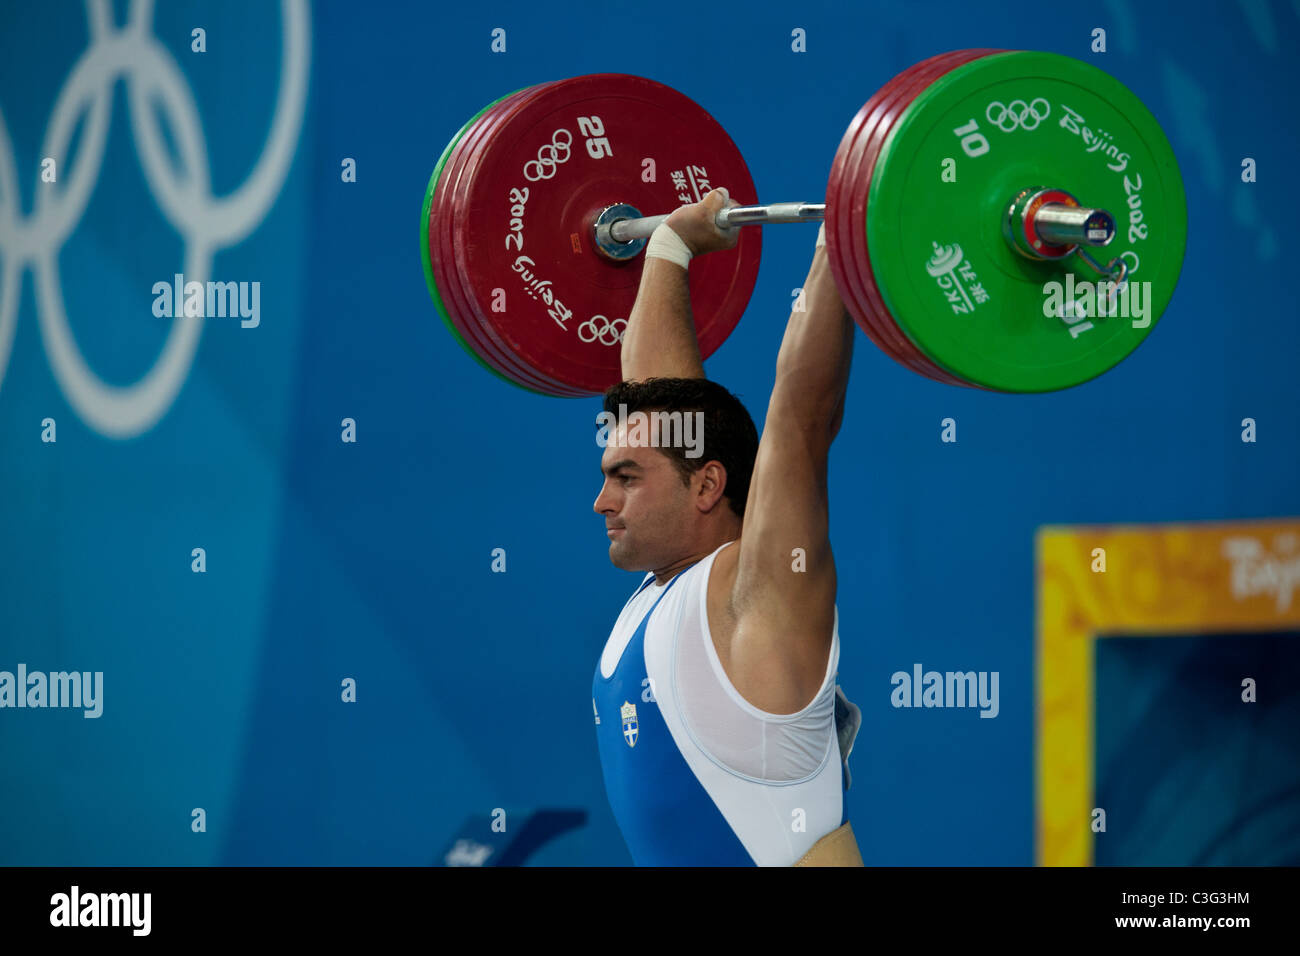 Konstantinos Gkaripis (GRE) competing in the Weightlifting 94kg class at the 2008 Olympic Summer Games, Beijing, China. Stock Photo